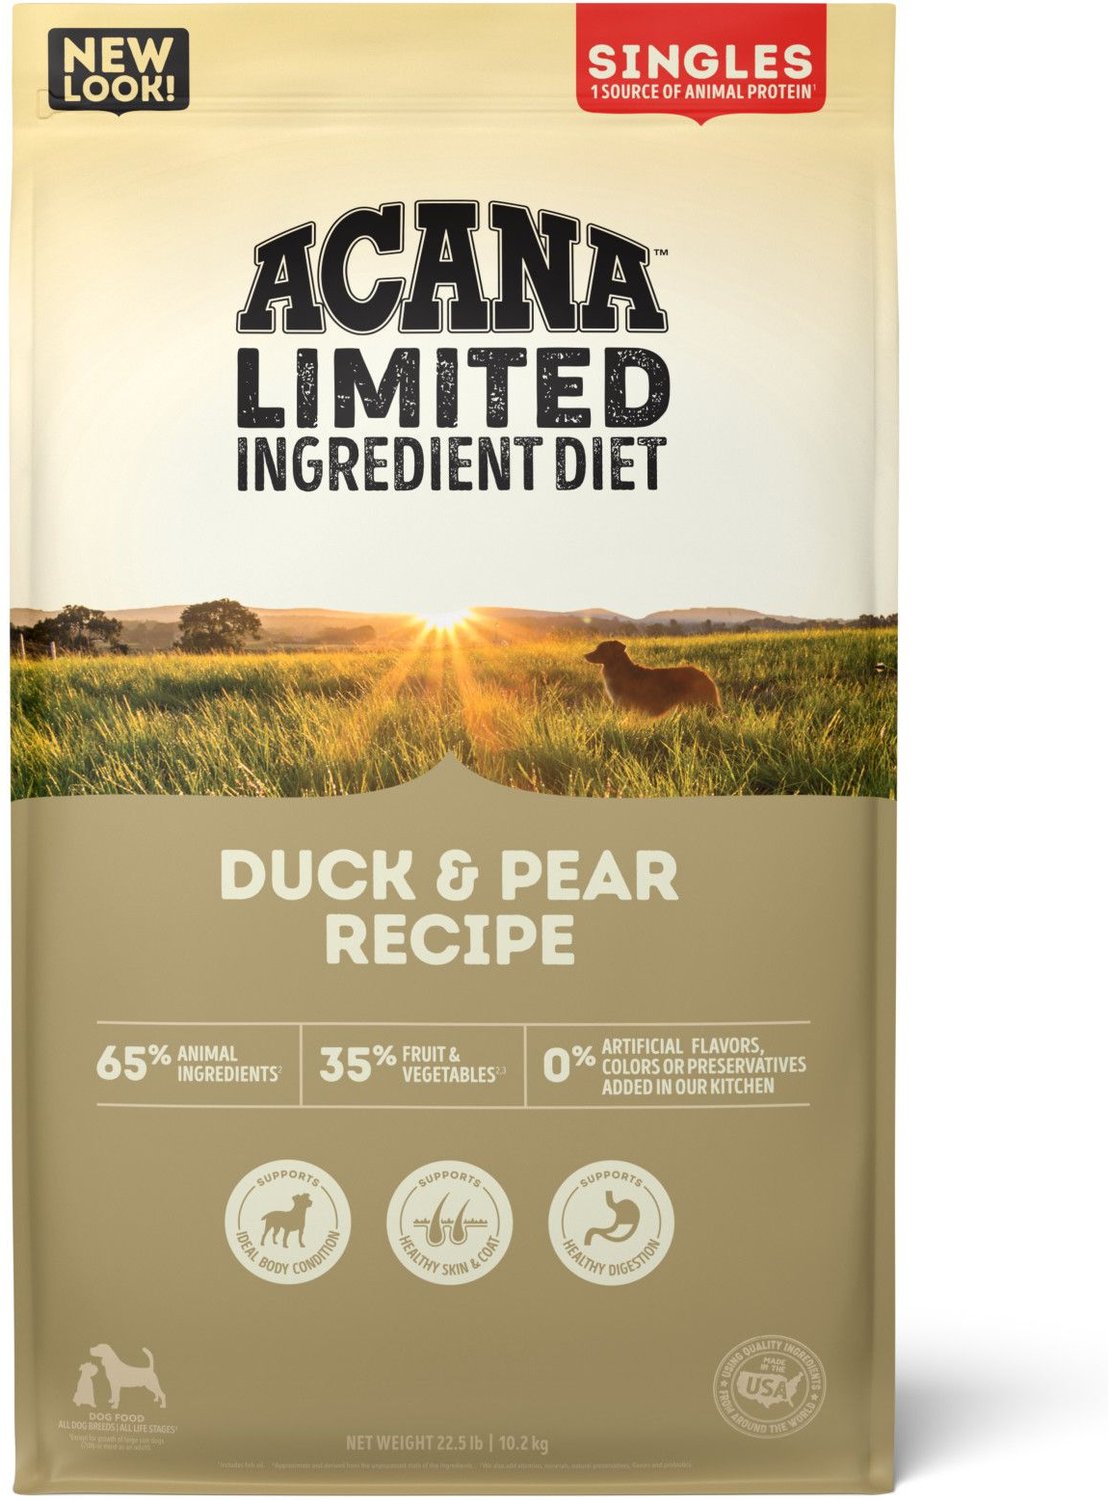 ACANA Singles Limited Ingredient Duck & Pear Grain-Free